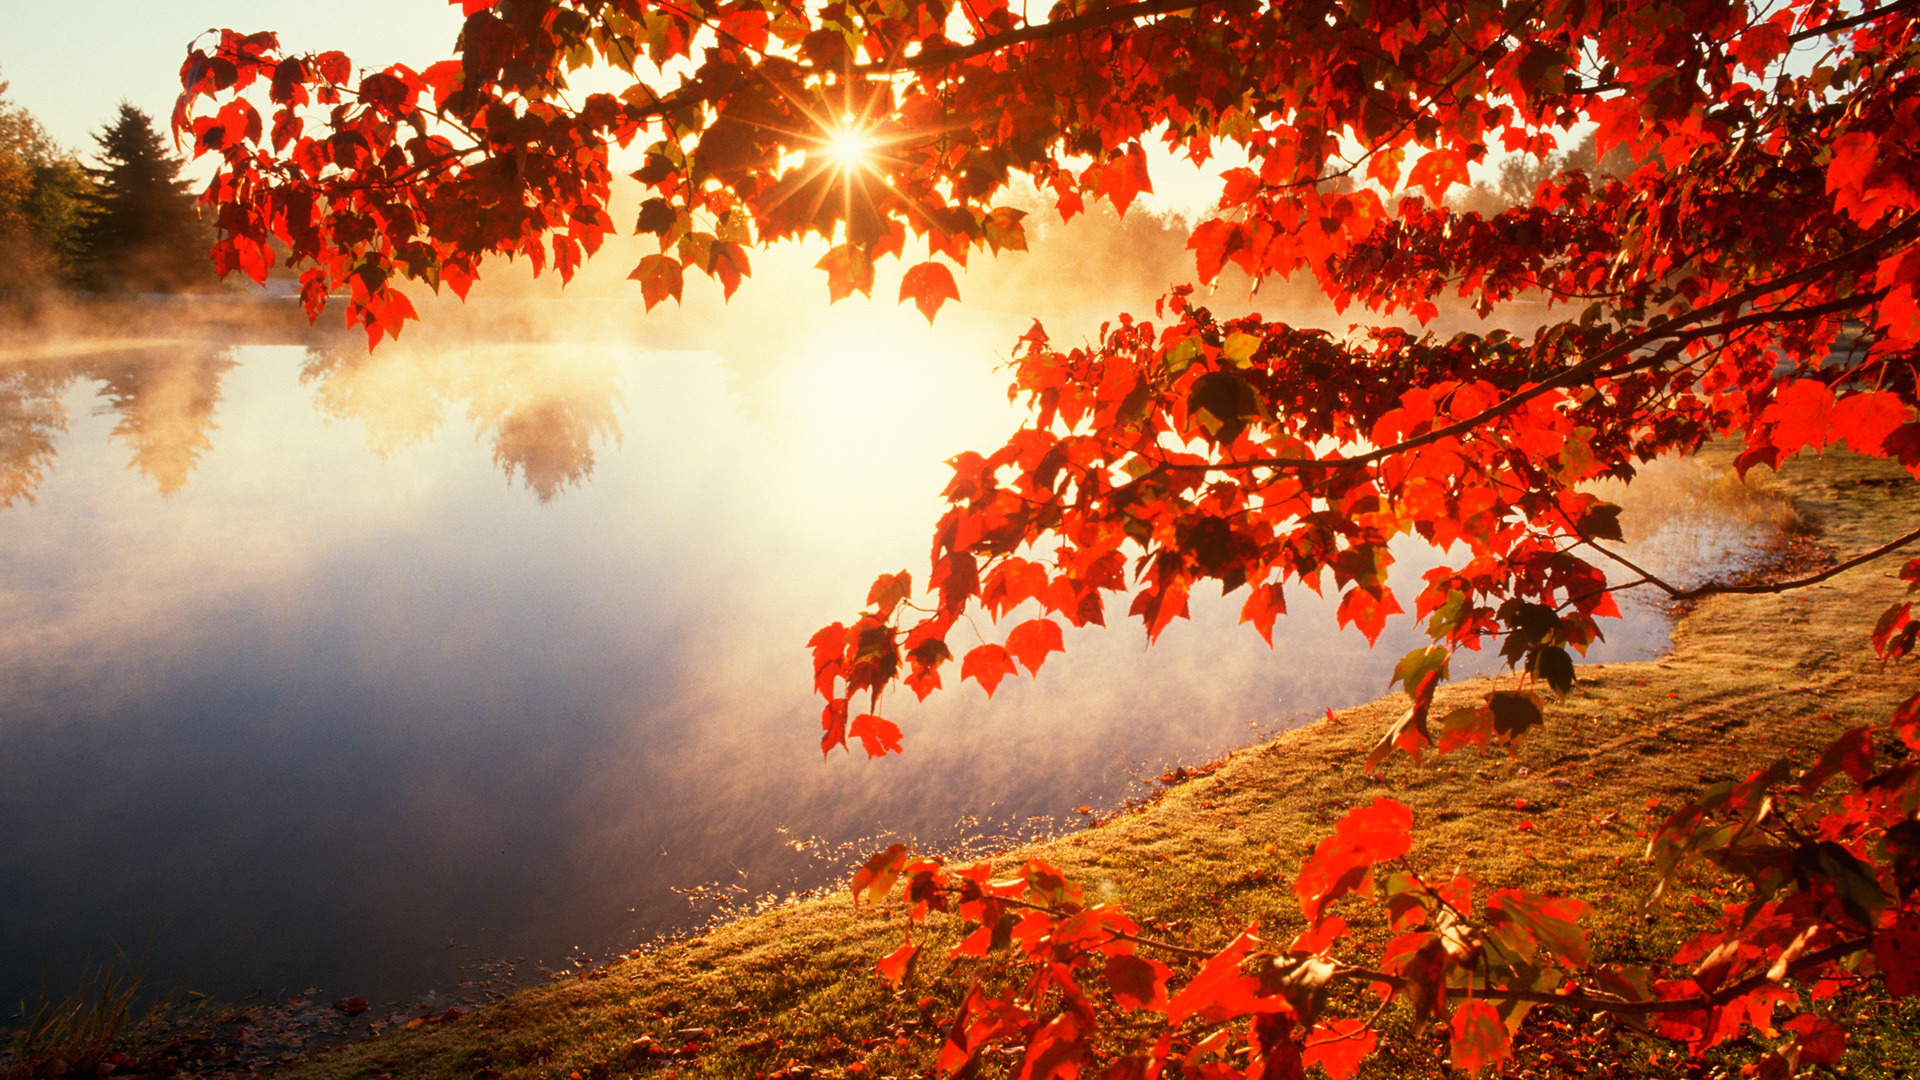 Free HD Fall Wallpapers make your screen shine brighter